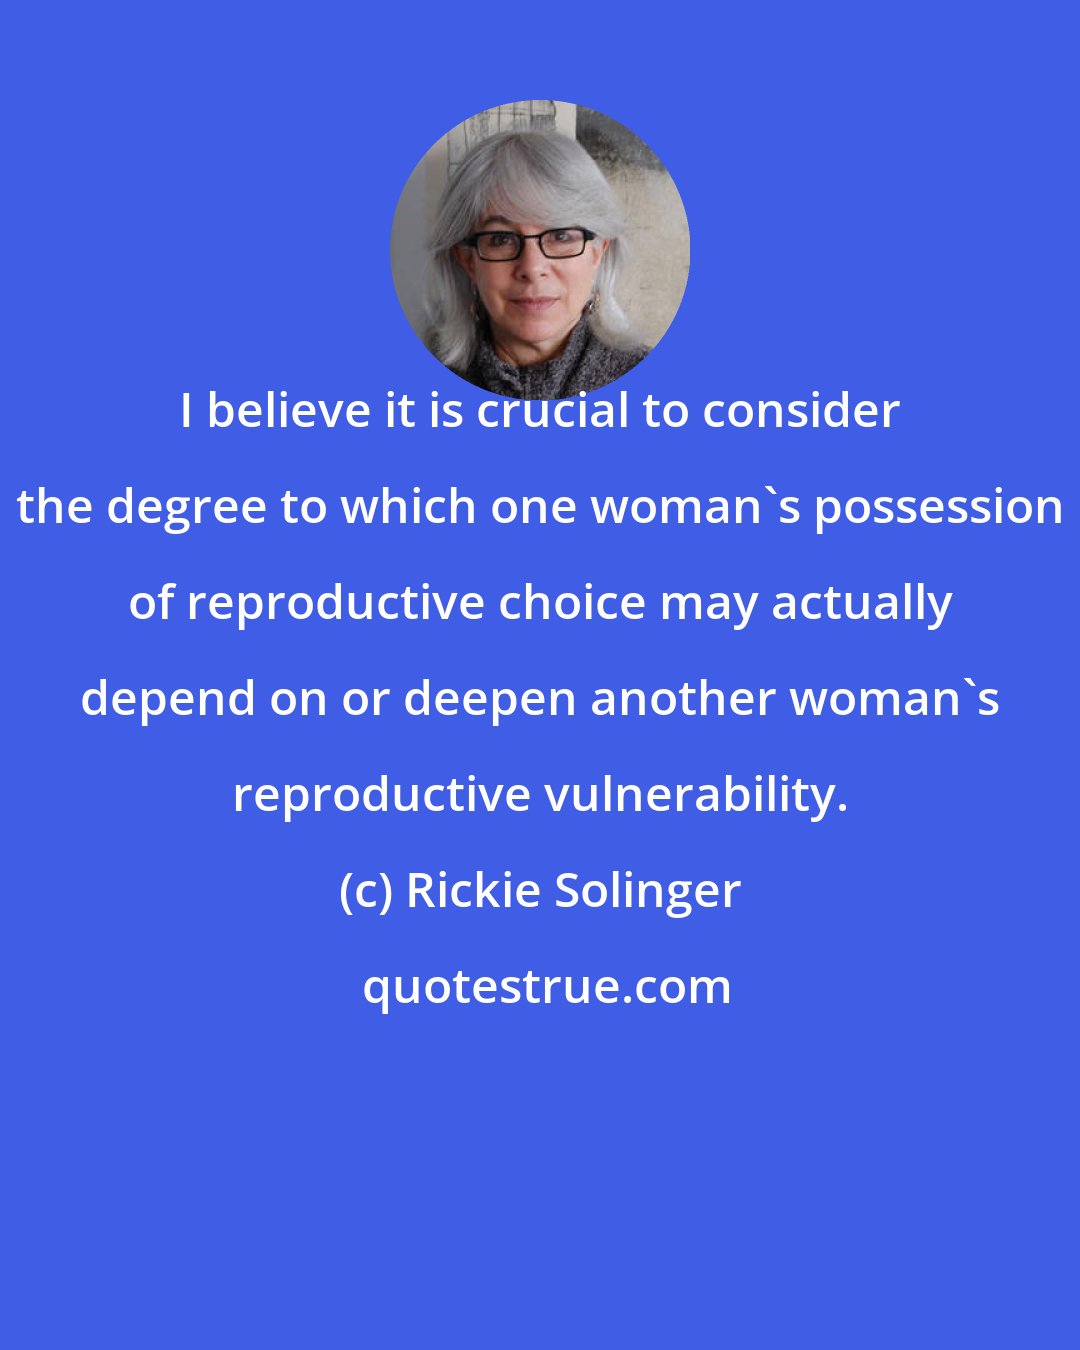 Rickie Solinger: I believe it is crucial to consider the degree to which one woman's possession of reproductive choice may actually depend on or deepen another woman's reproductive vulnerability.